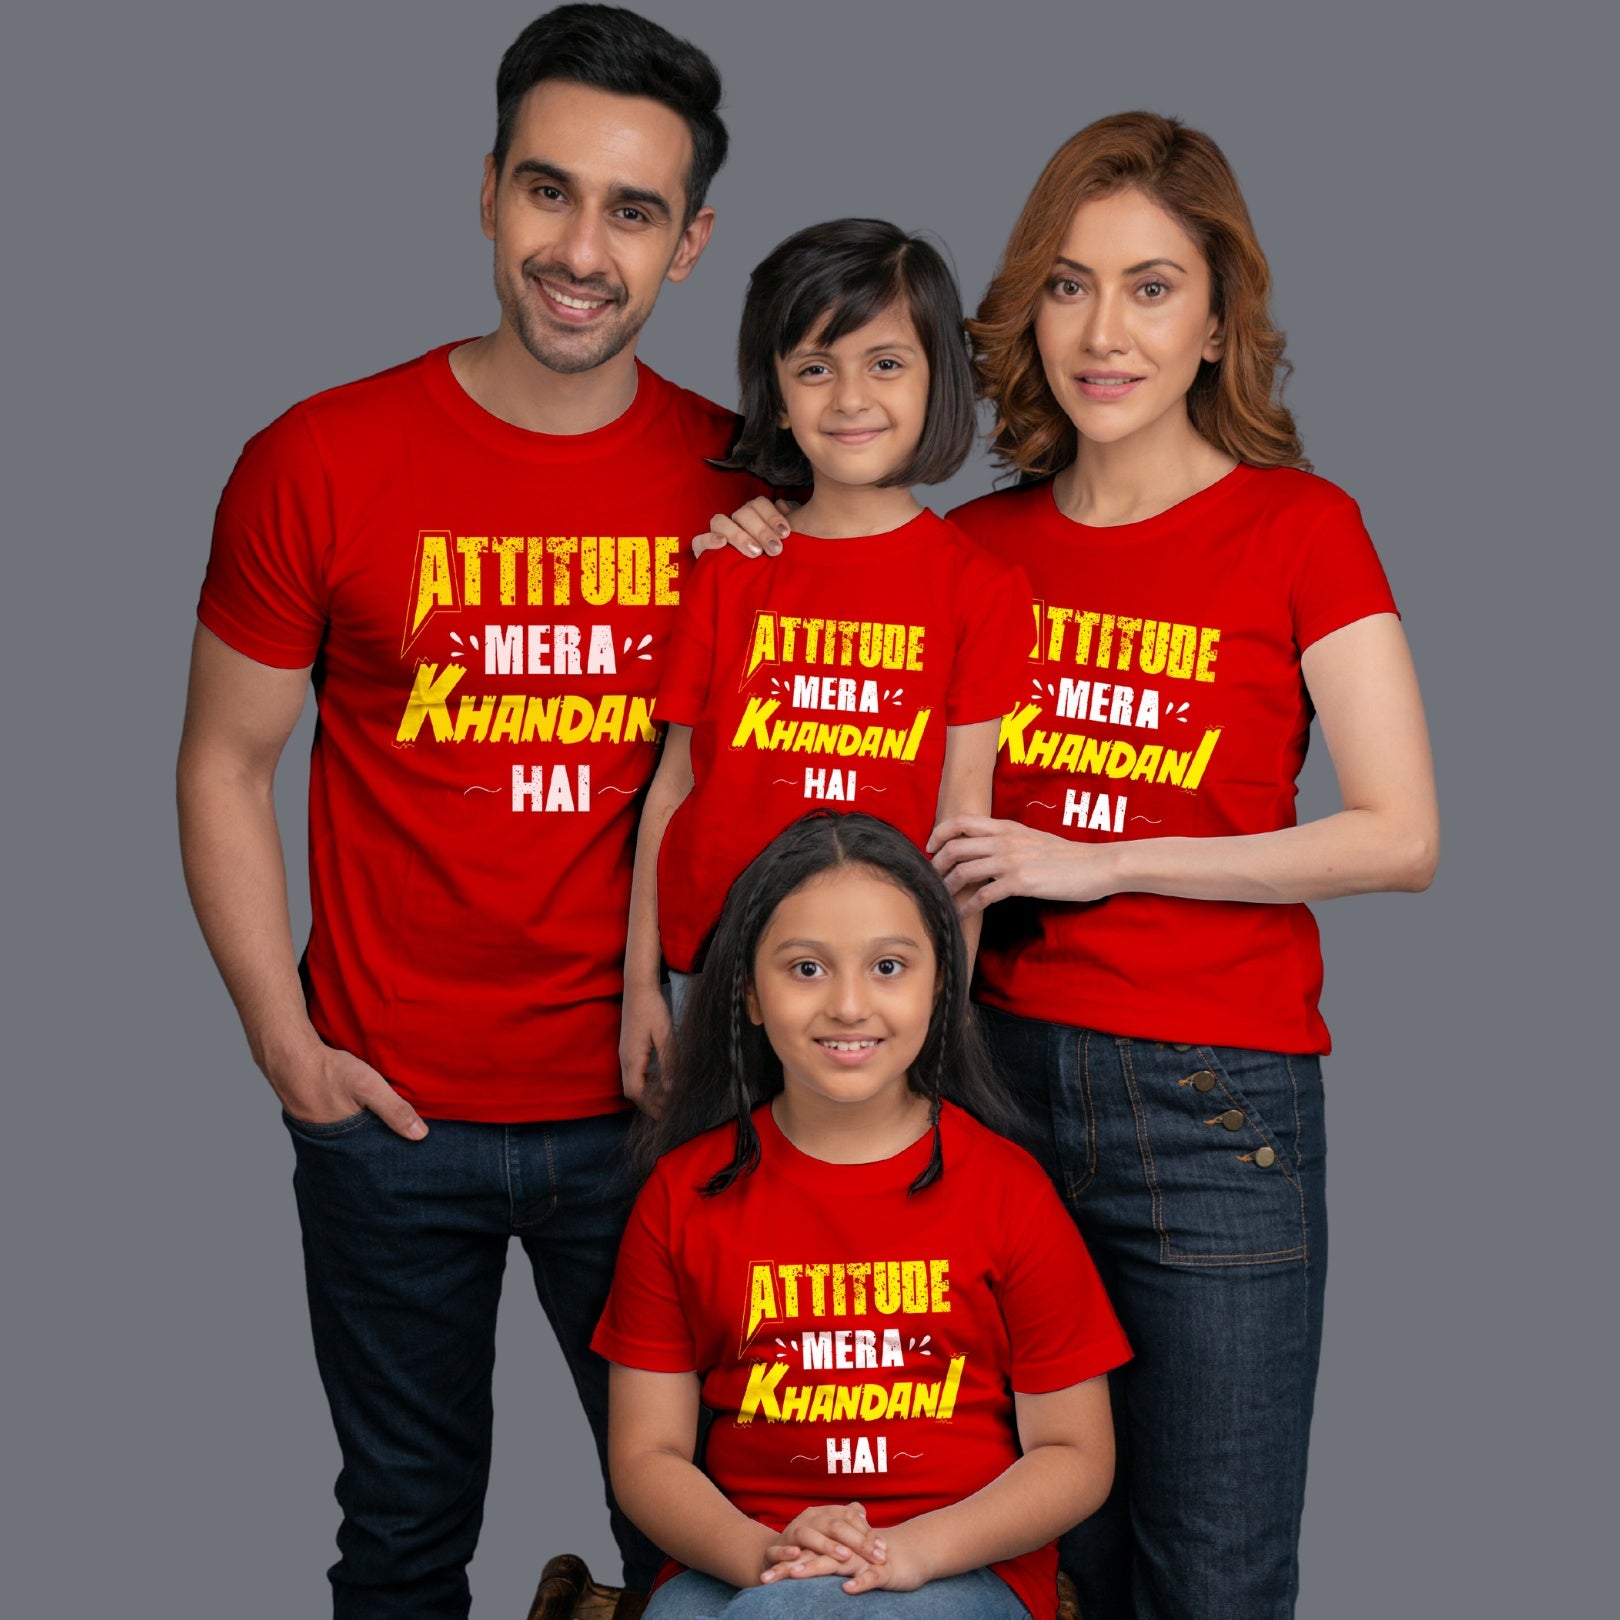 Family t shirts set of 4 Mom Dad Two Daughters in Red Colour - Attitude Mera Khandani Hain Variant